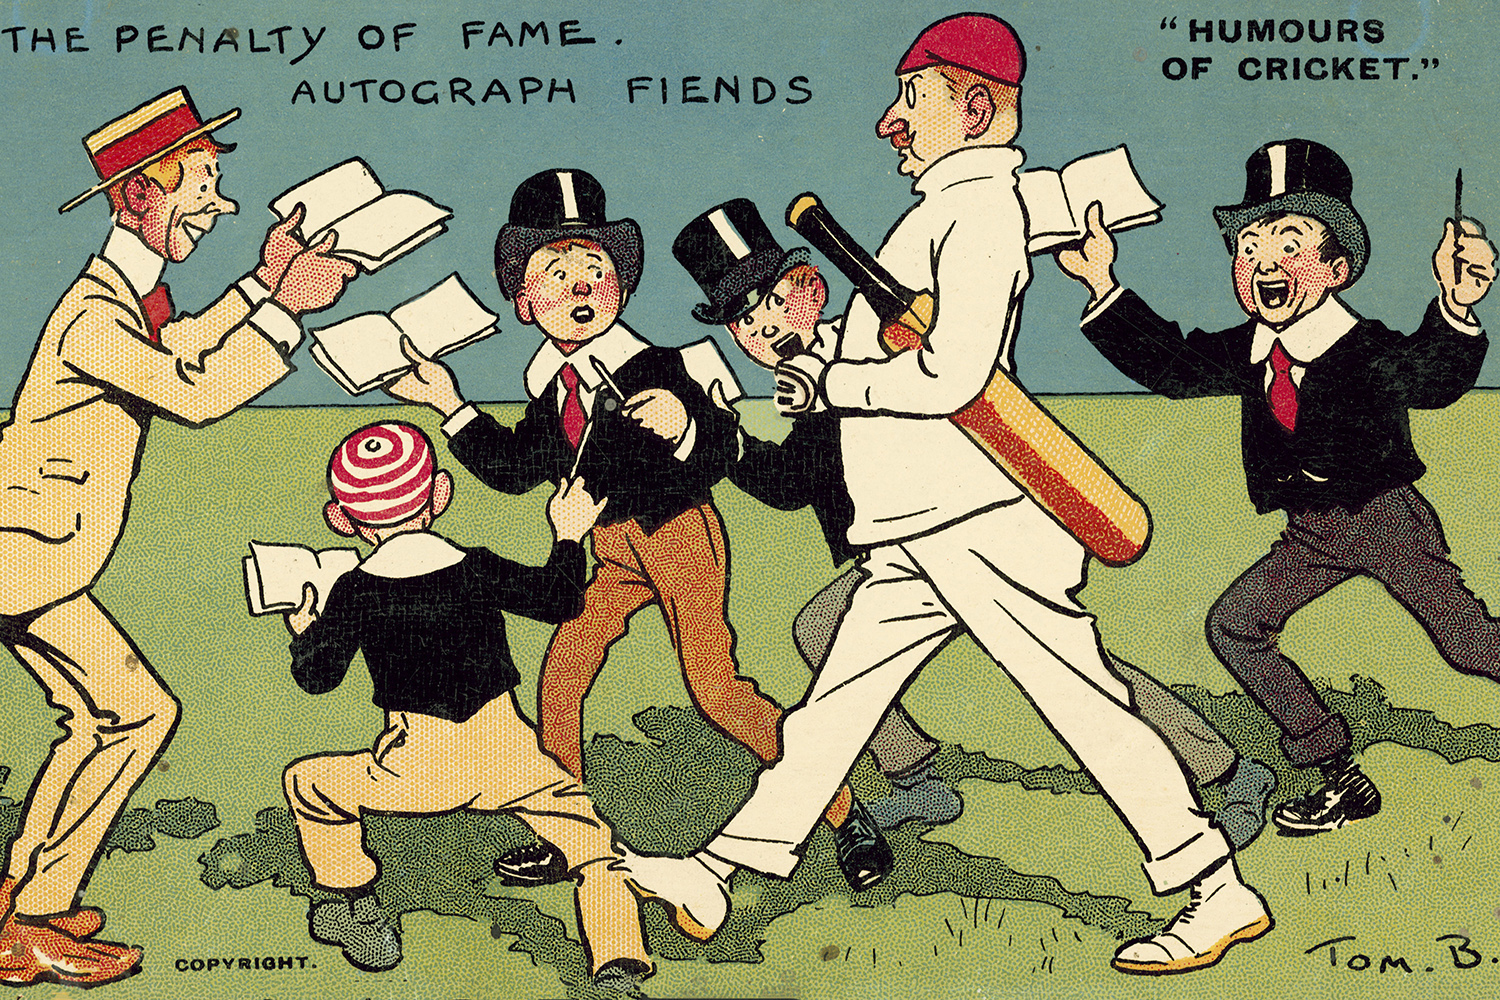 'Drawbacks of celebrity: a cricketer pestered by autograph hunters', by Tom Browne, early 20th century.